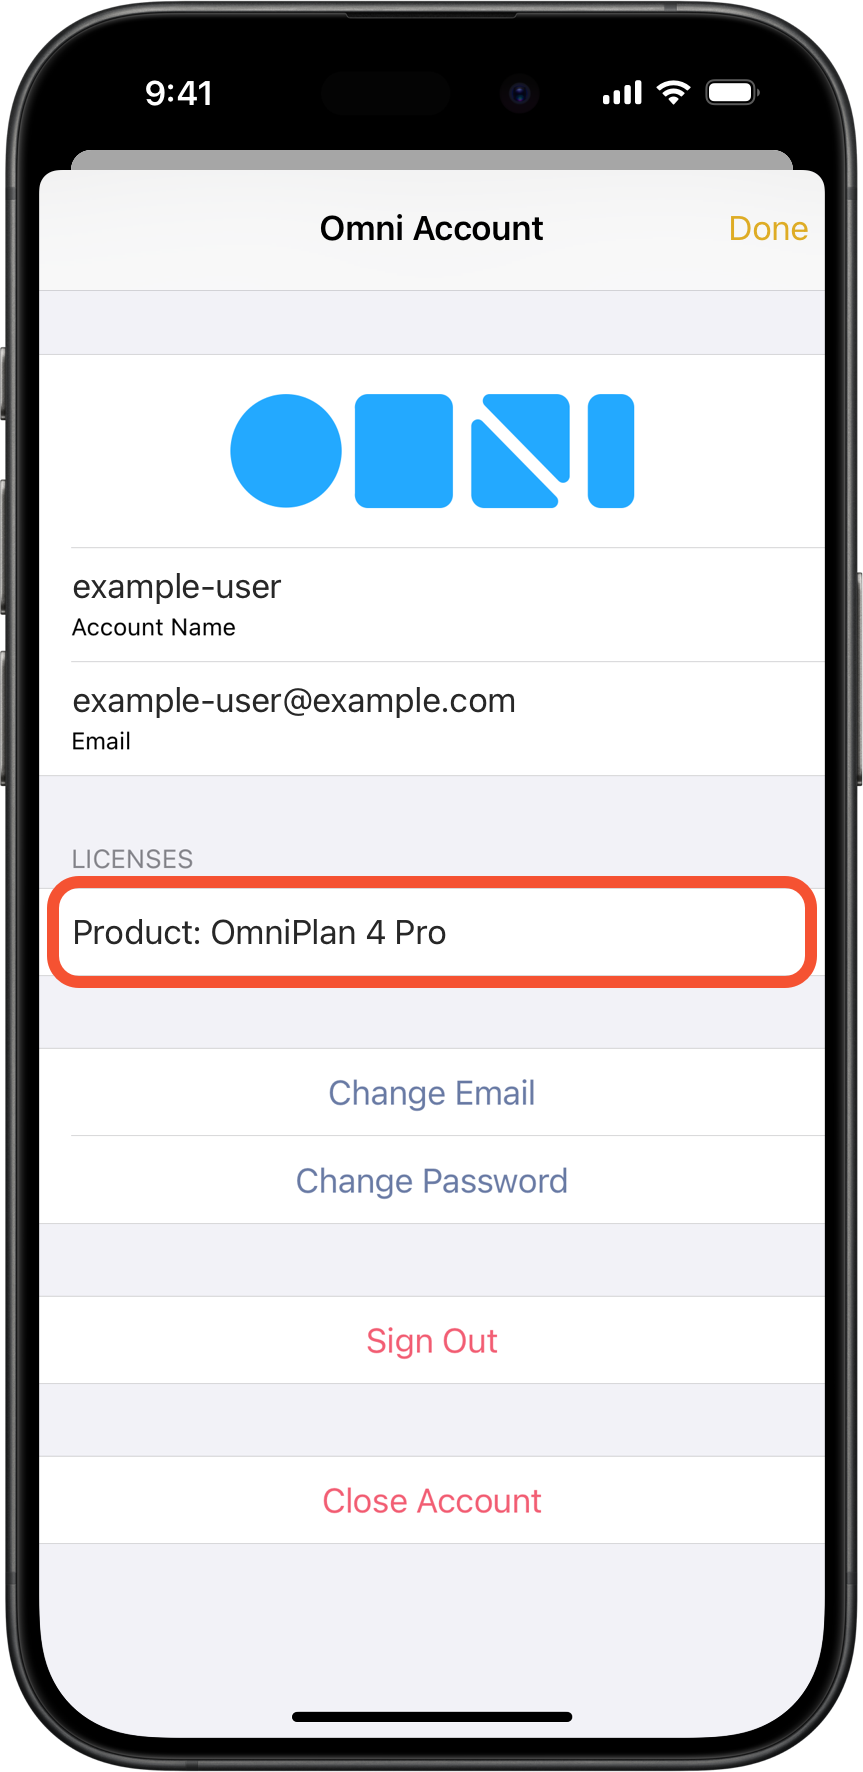 Omni Account screen showing an unregistered previous in-app purchase